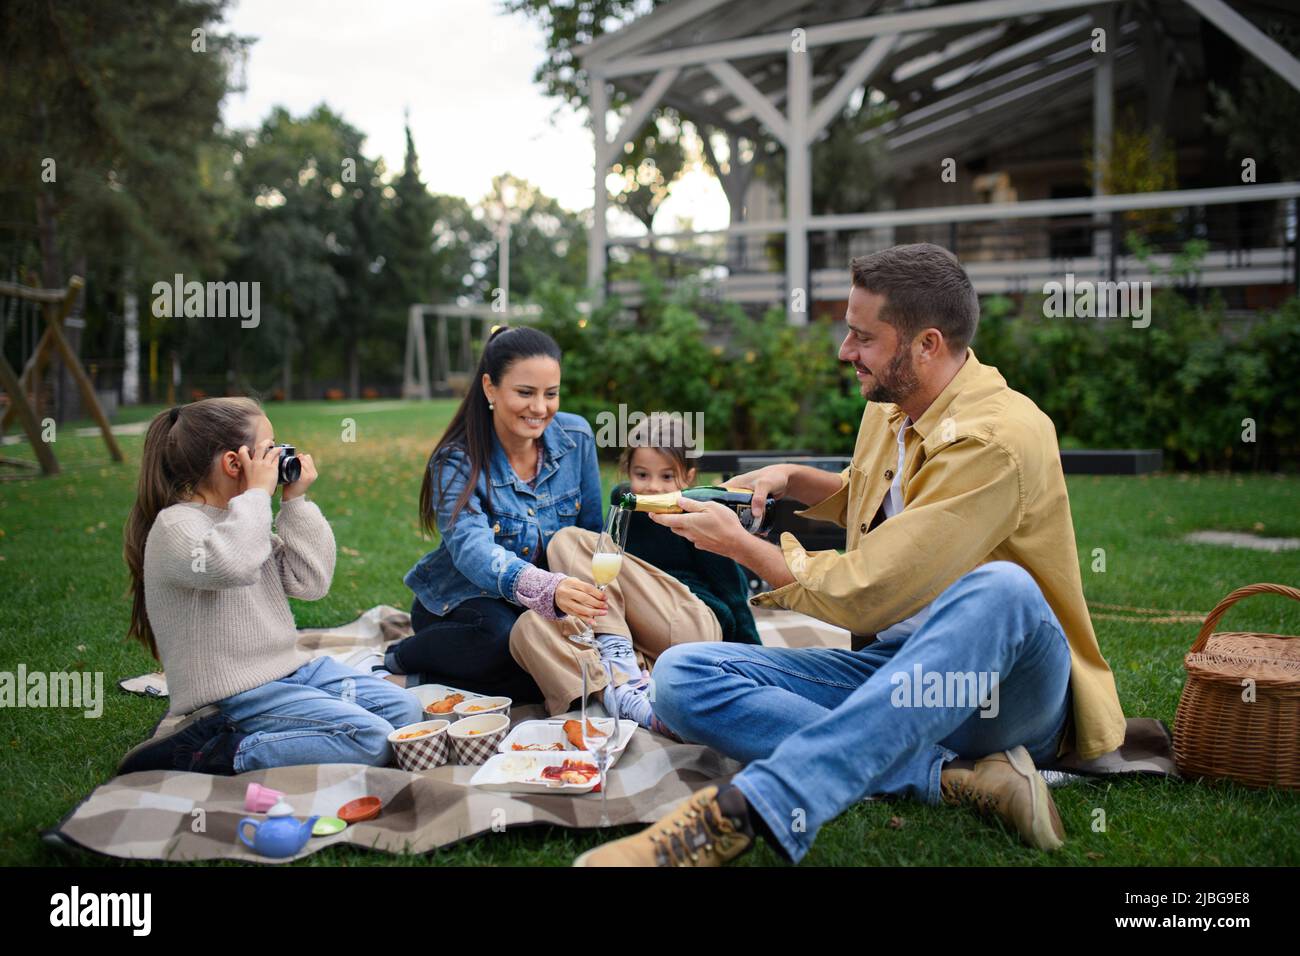 Happy young family sitting on blanket and having take away picnic outdoors in restaurant area. Stock Photo